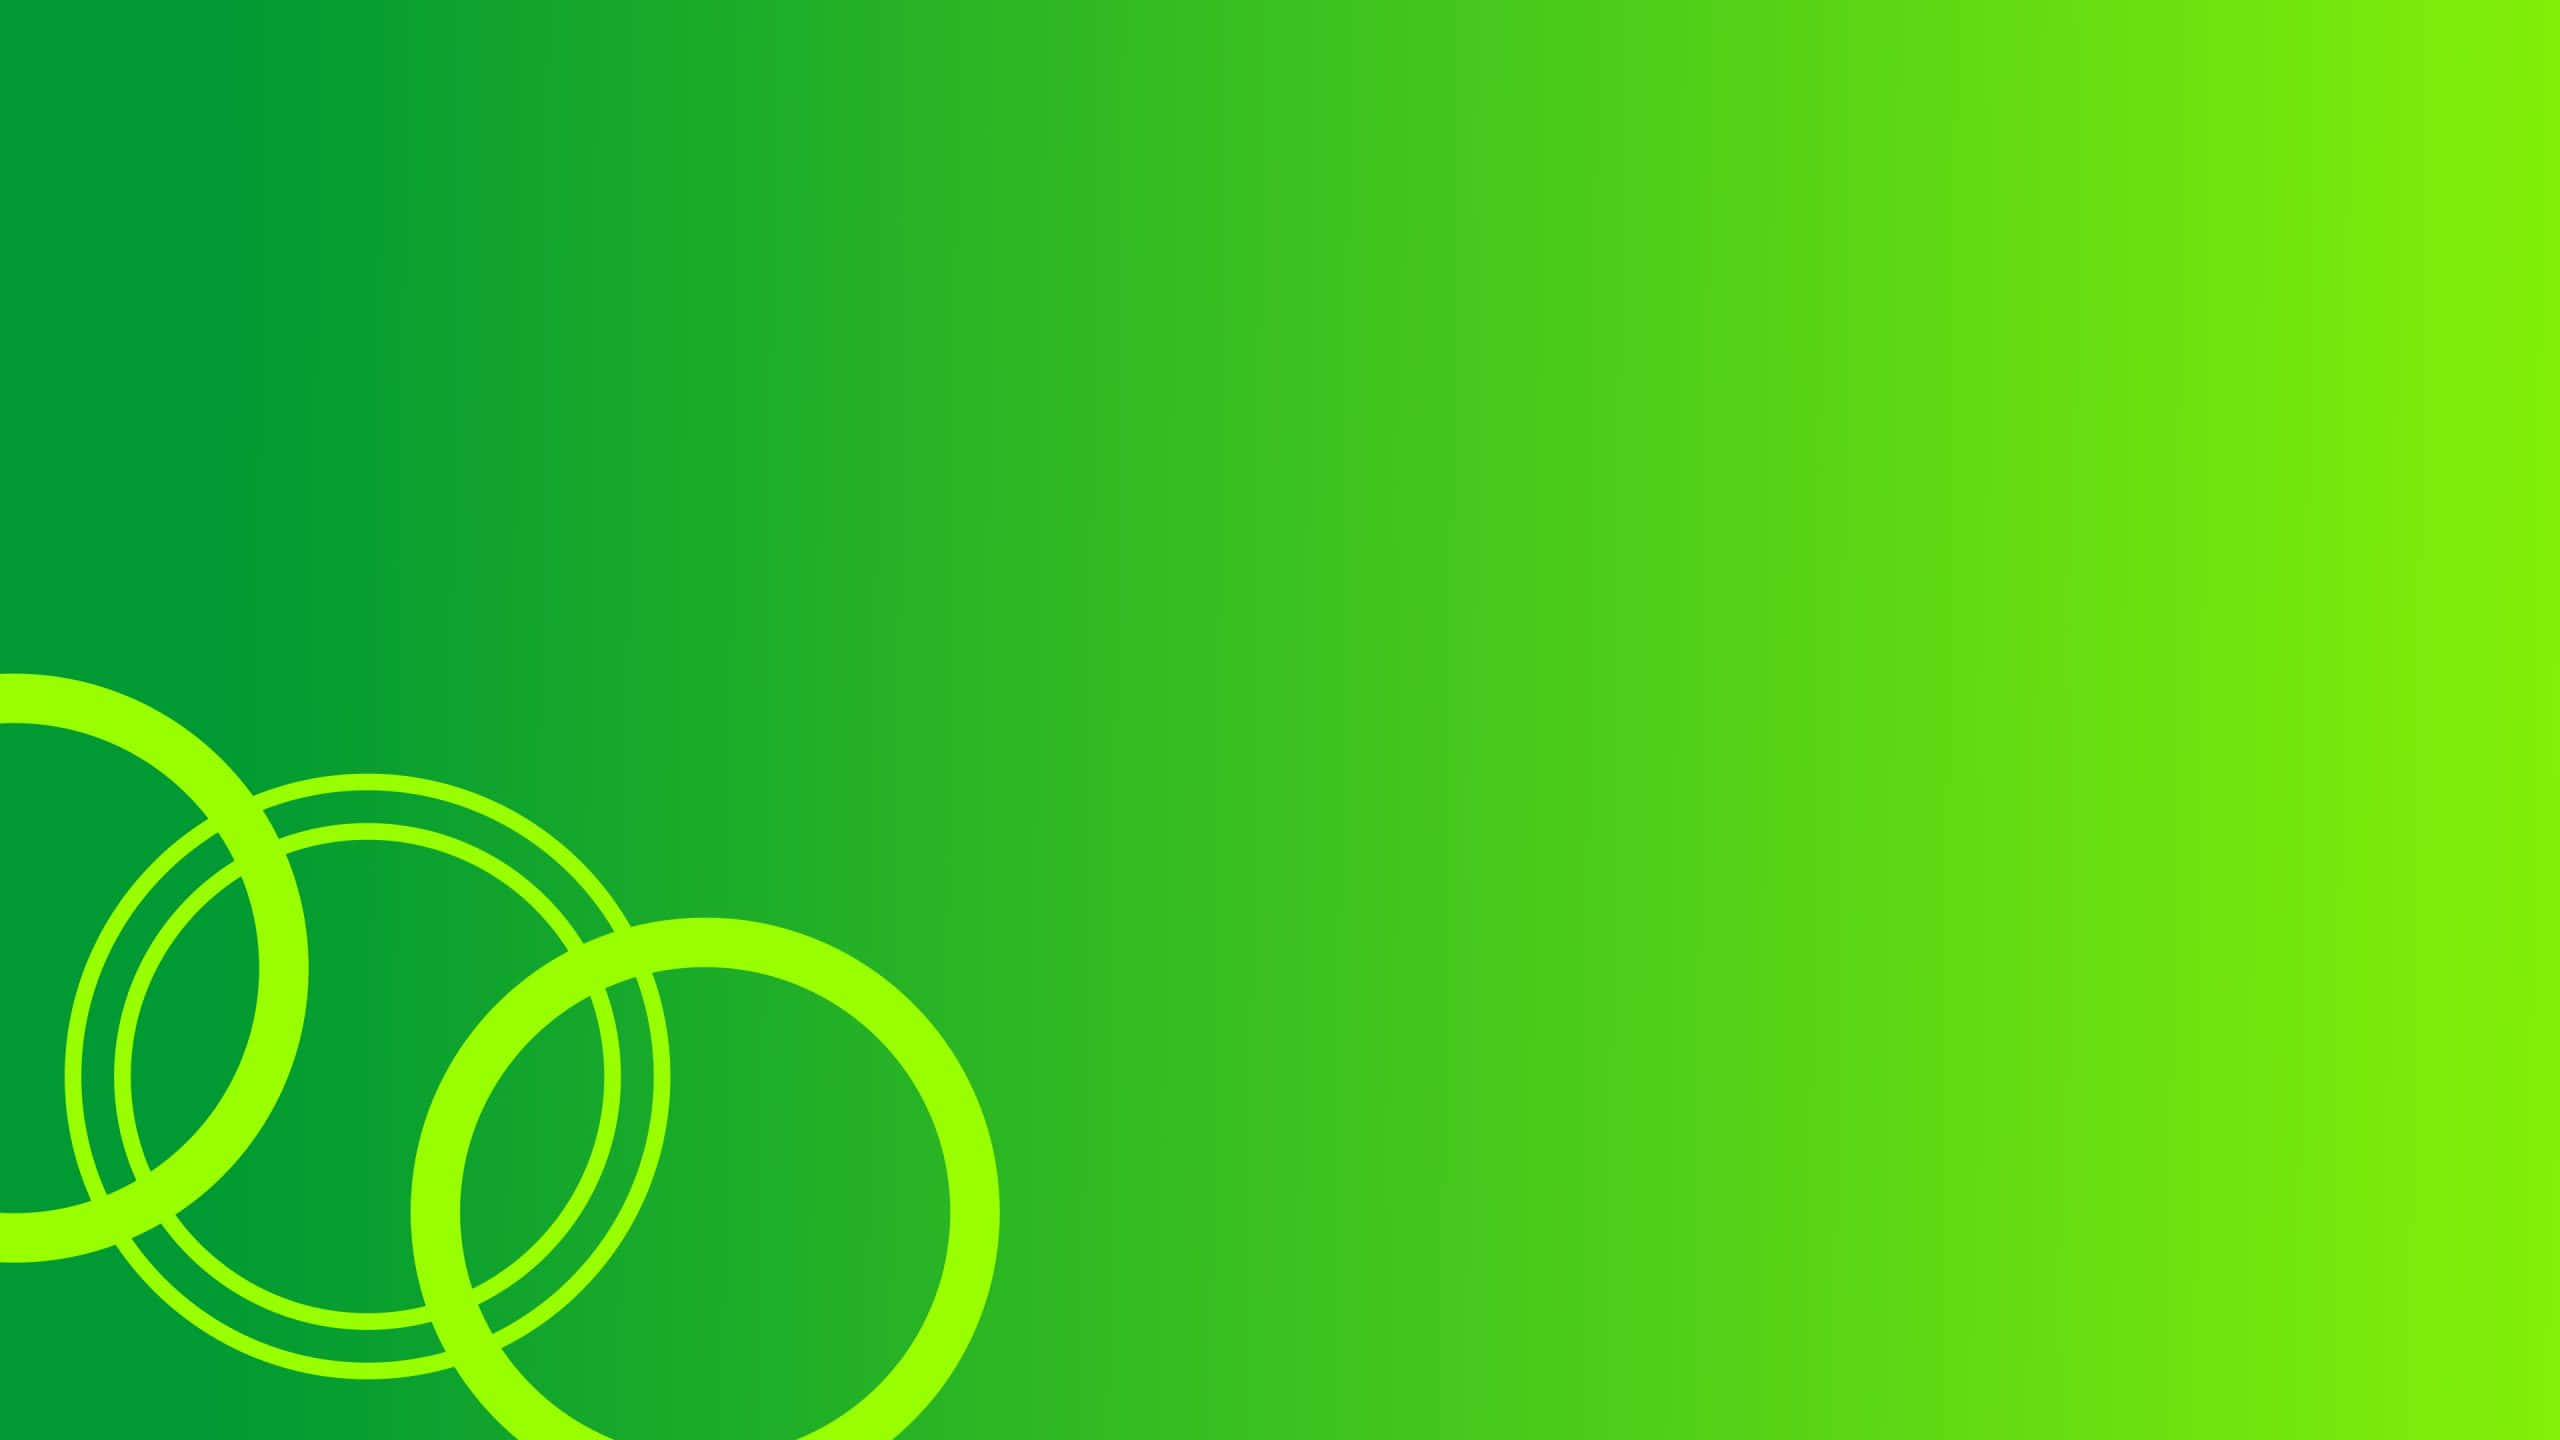 Light Green Circles On Gradient Background